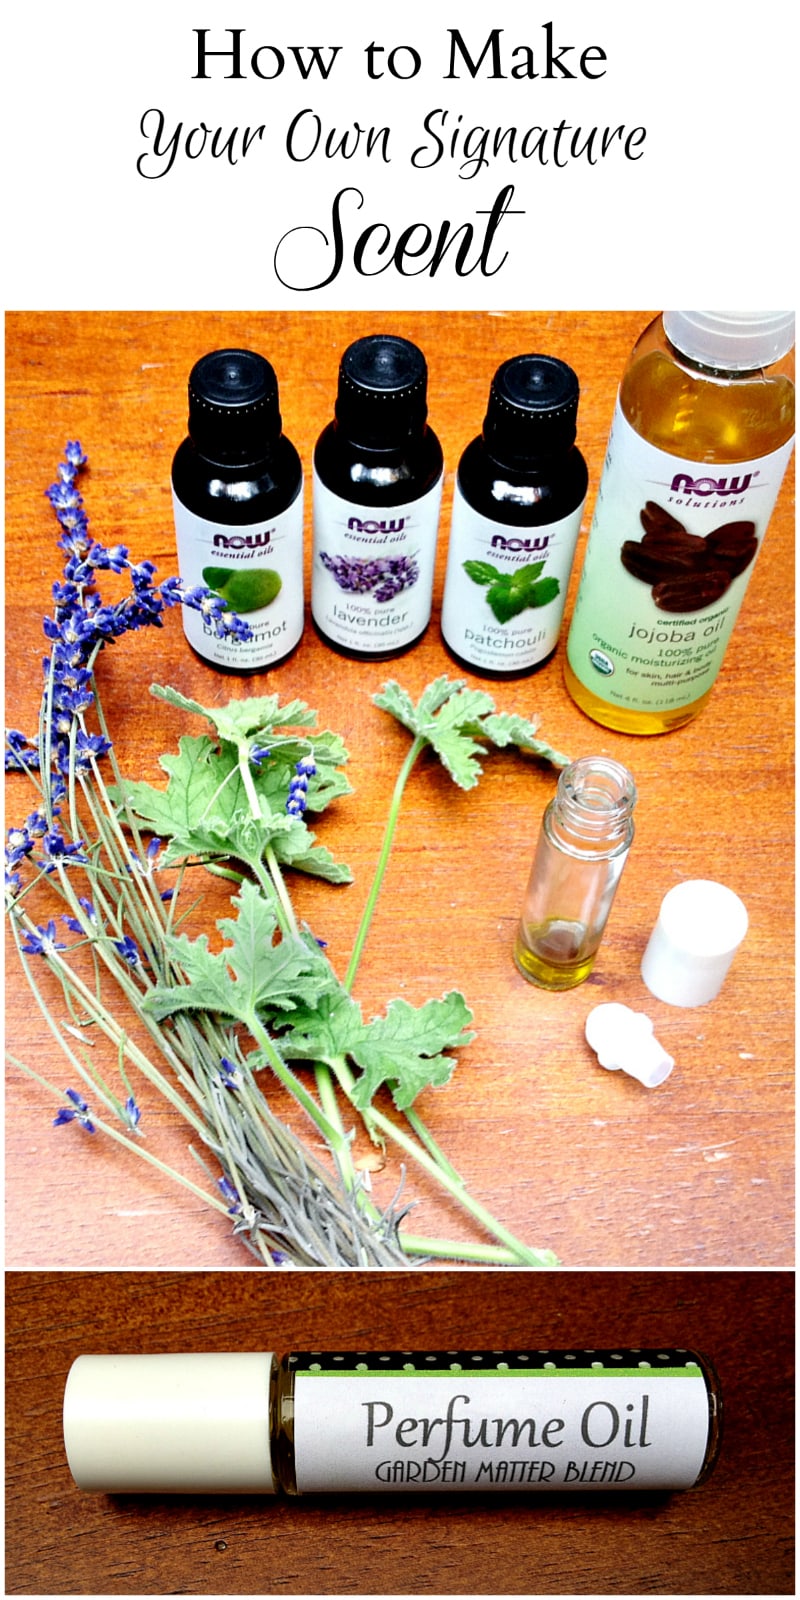 Learn how to make your signature scent with perfume oil and essential oils. A great group activity where you can share each others oils and experiment.